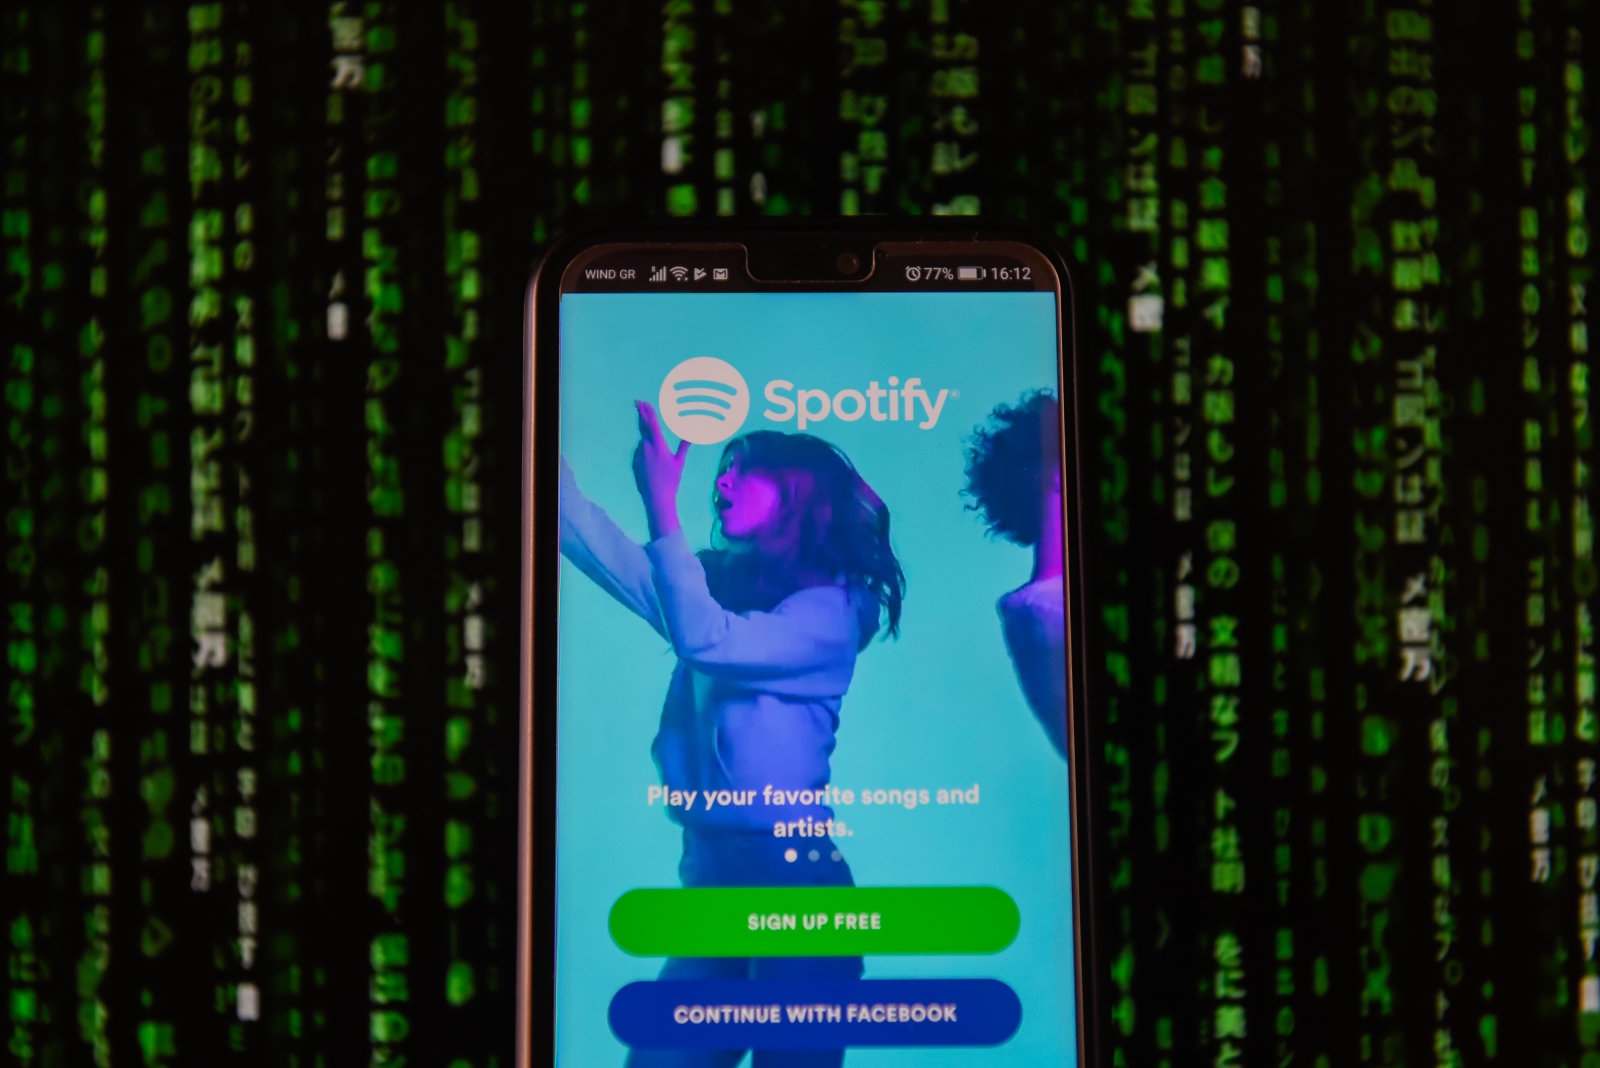 Spotify might let users build and listen to playlists together | DeviceDaily.com